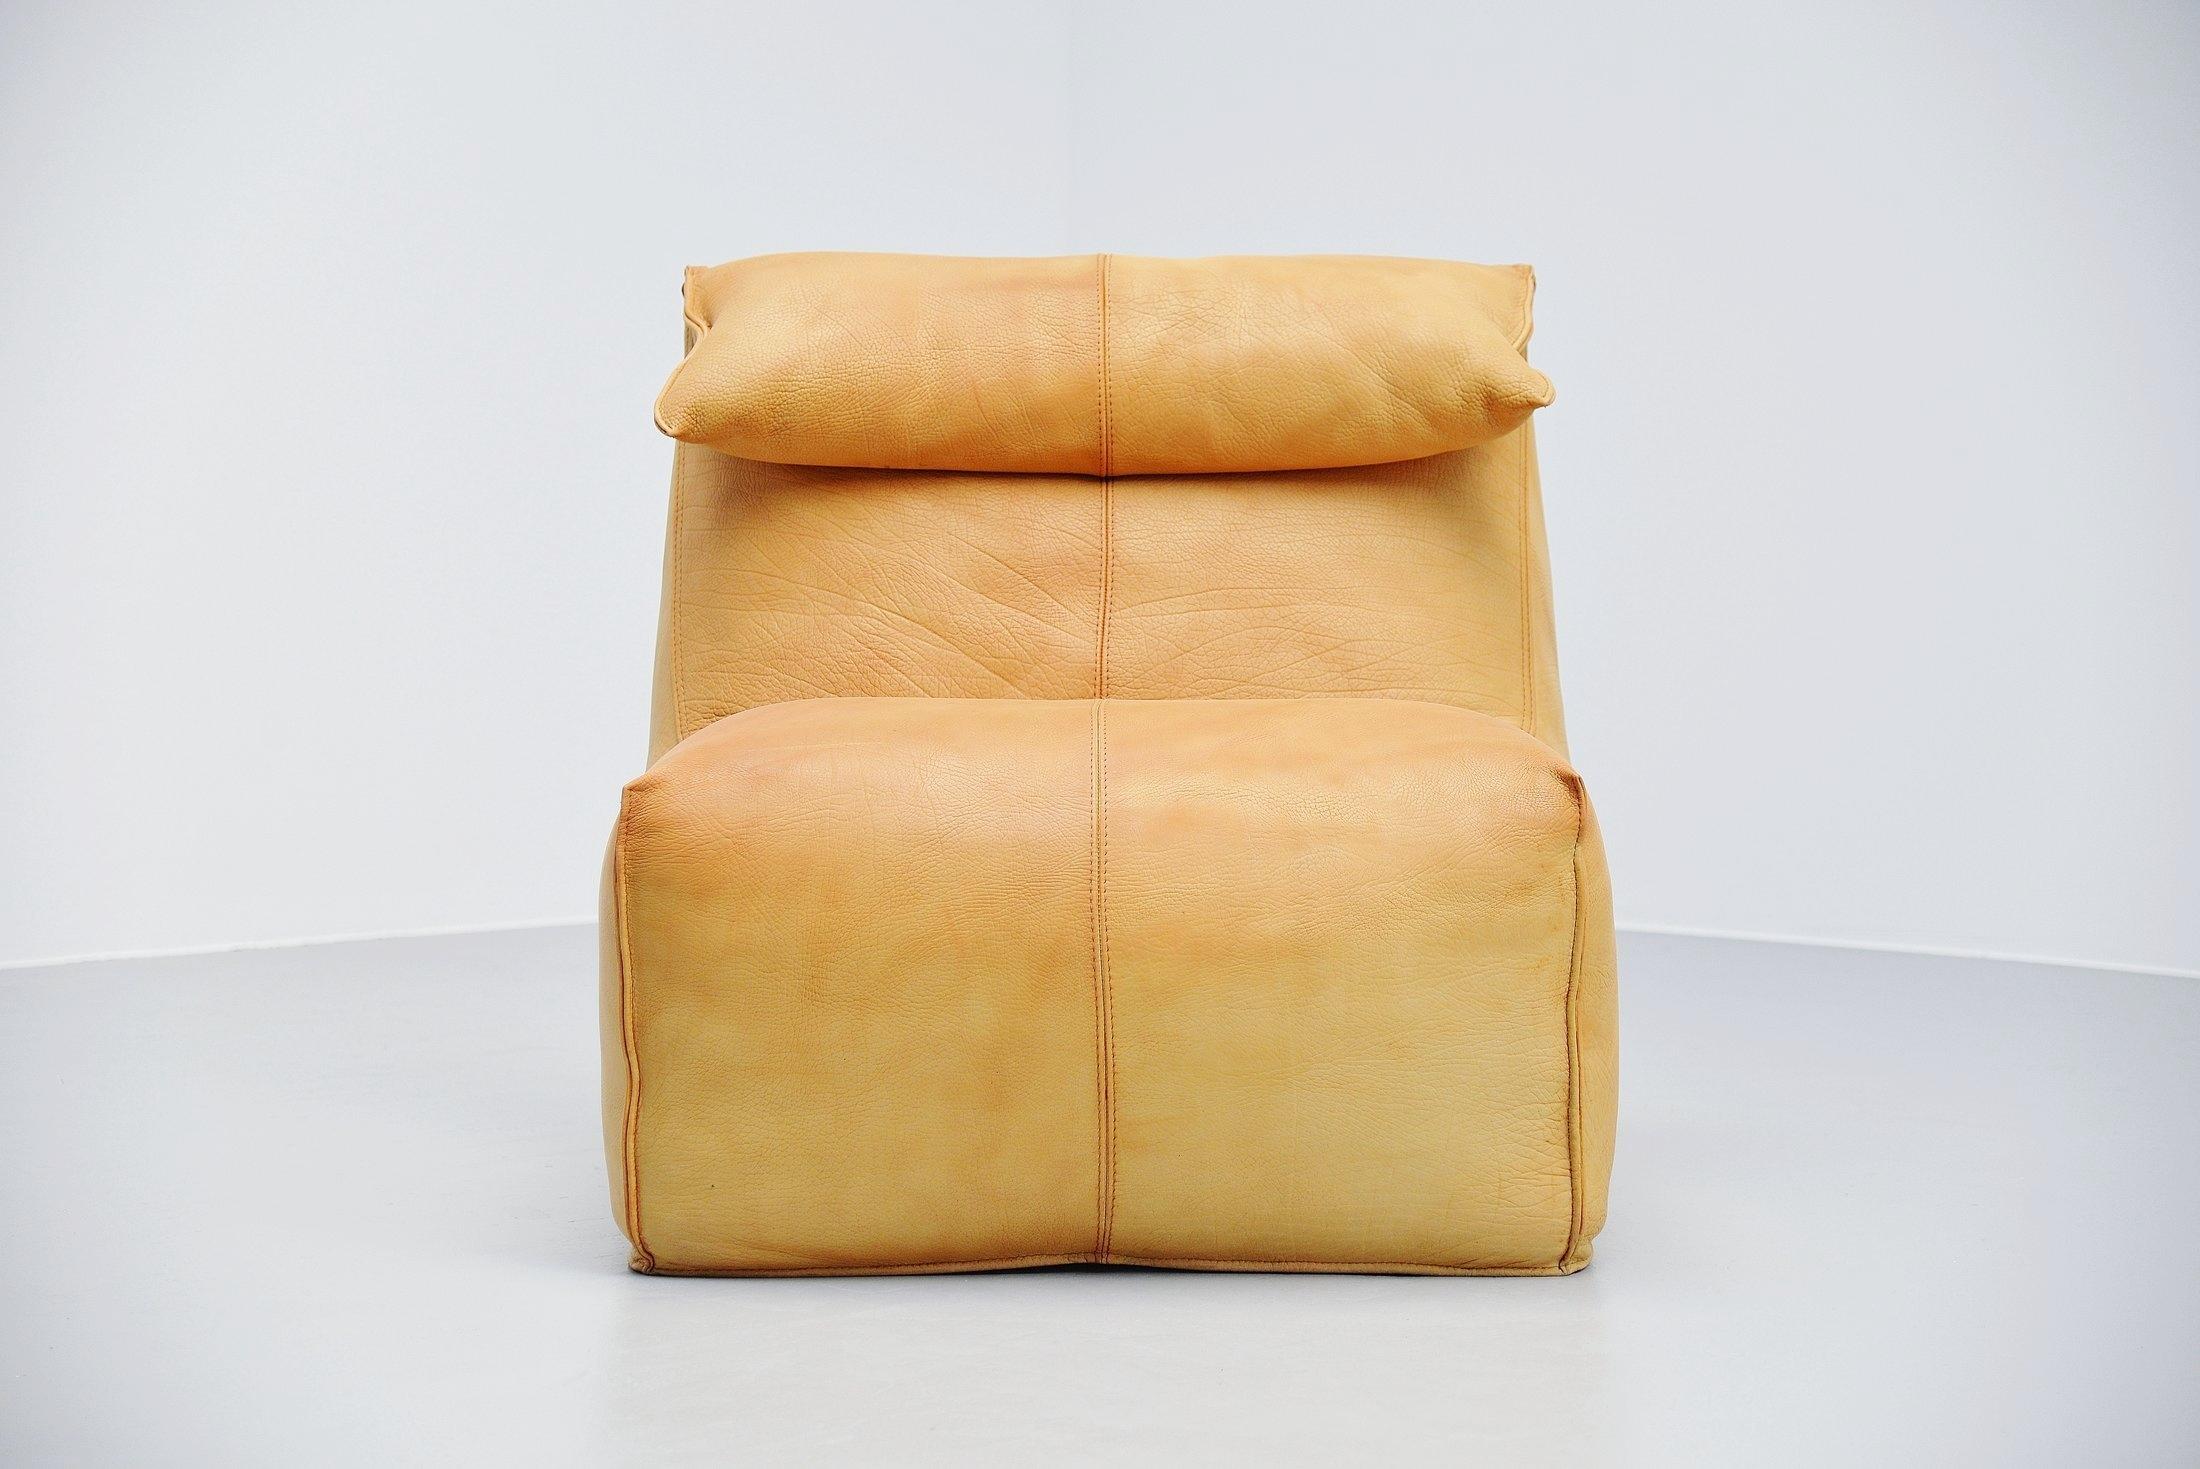 Super comfortable lounge chair from the so called ‘Bambole’ series, designed by Mario Bellini and manufactured by B&B Italia in 1972. Very nice and high quality lounge chair. Very nice shaped chair made of very thick and high quality natural buffalo